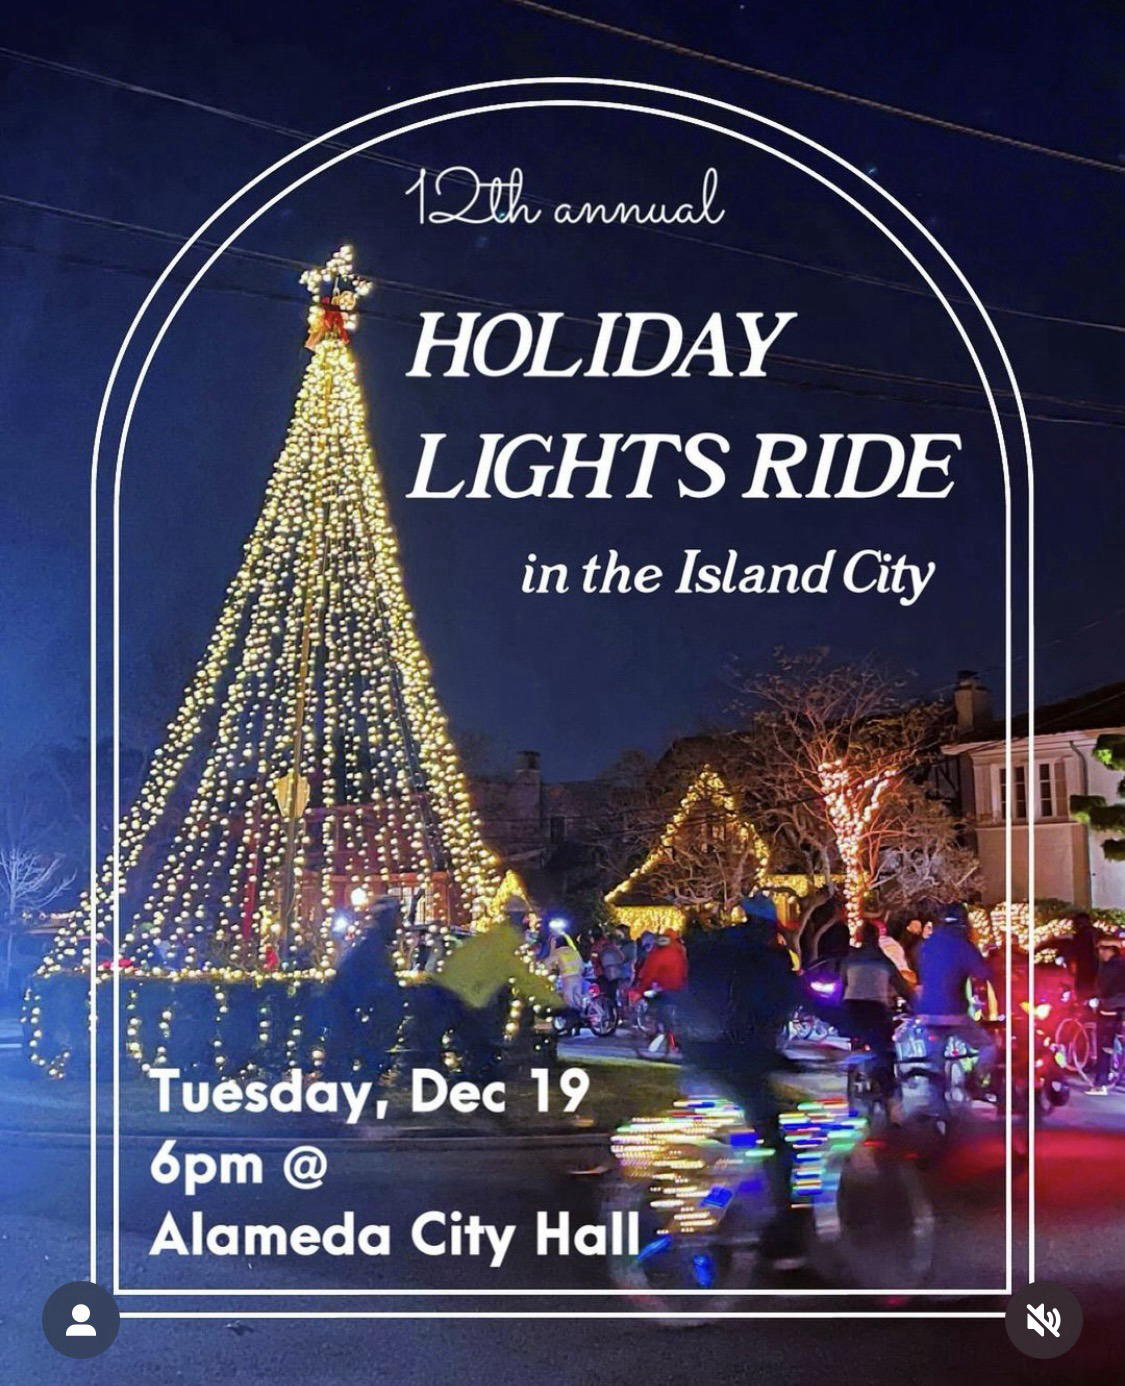 12th Annual Holiday Lights Ride in the Island City, Alameda